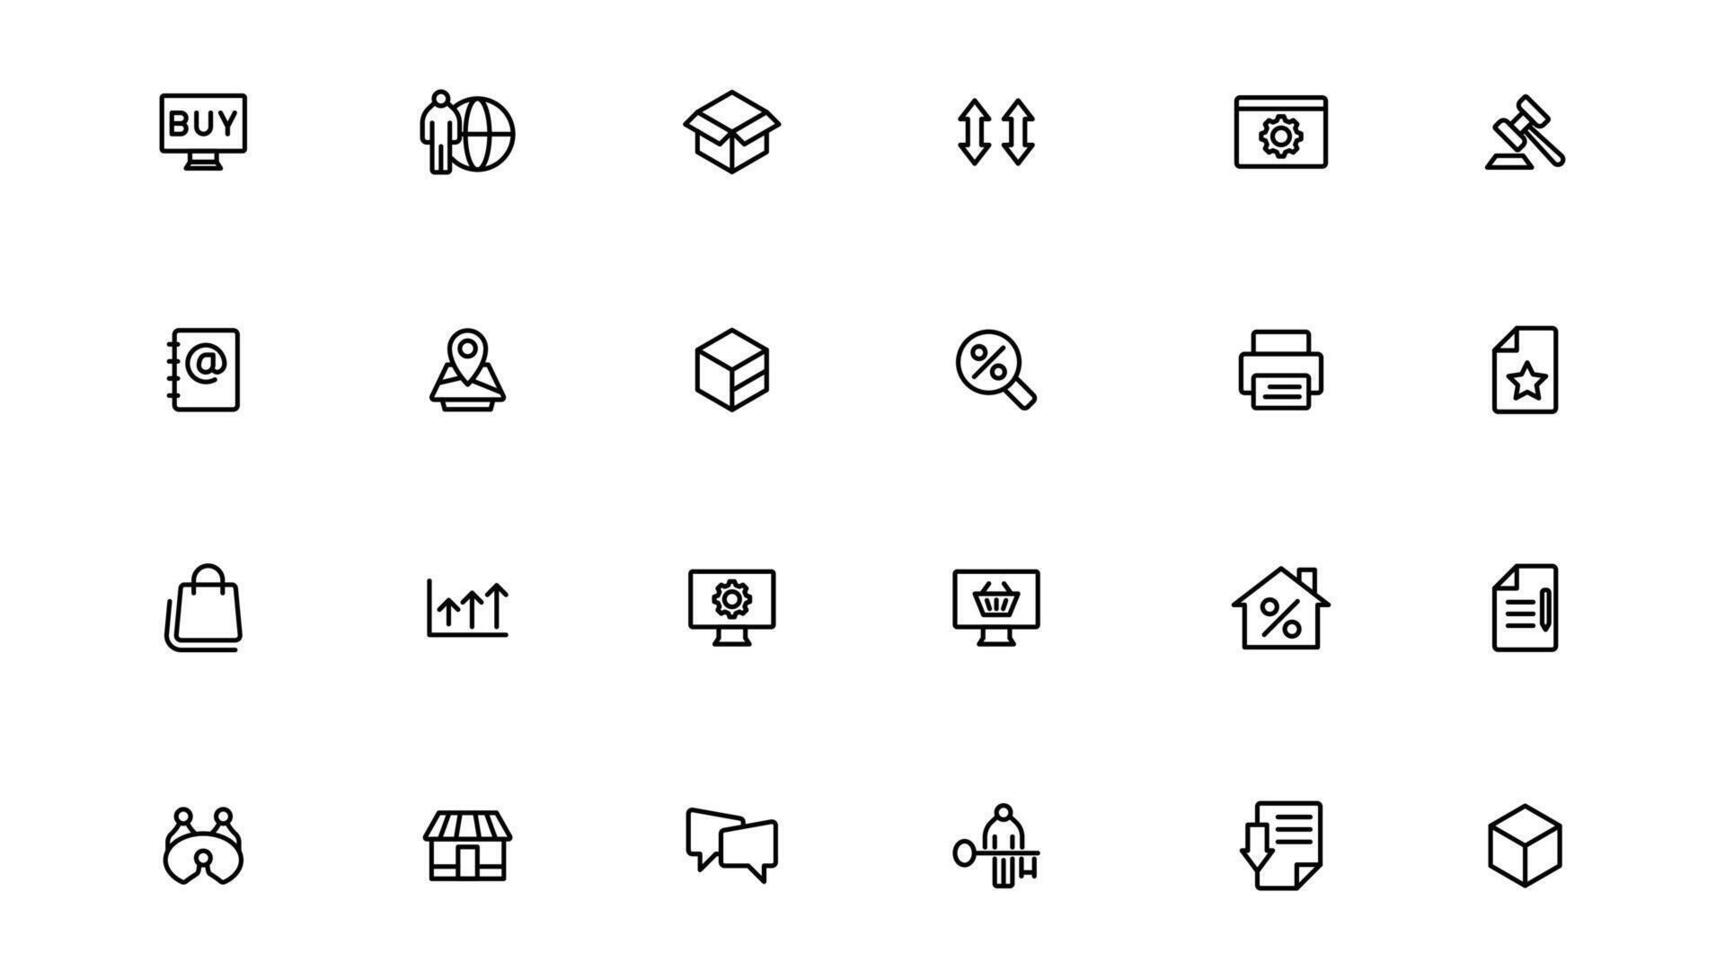 Digital Marketing web icons in line style. Social, networks, feedback, communication, marketing, ecommerce. vector